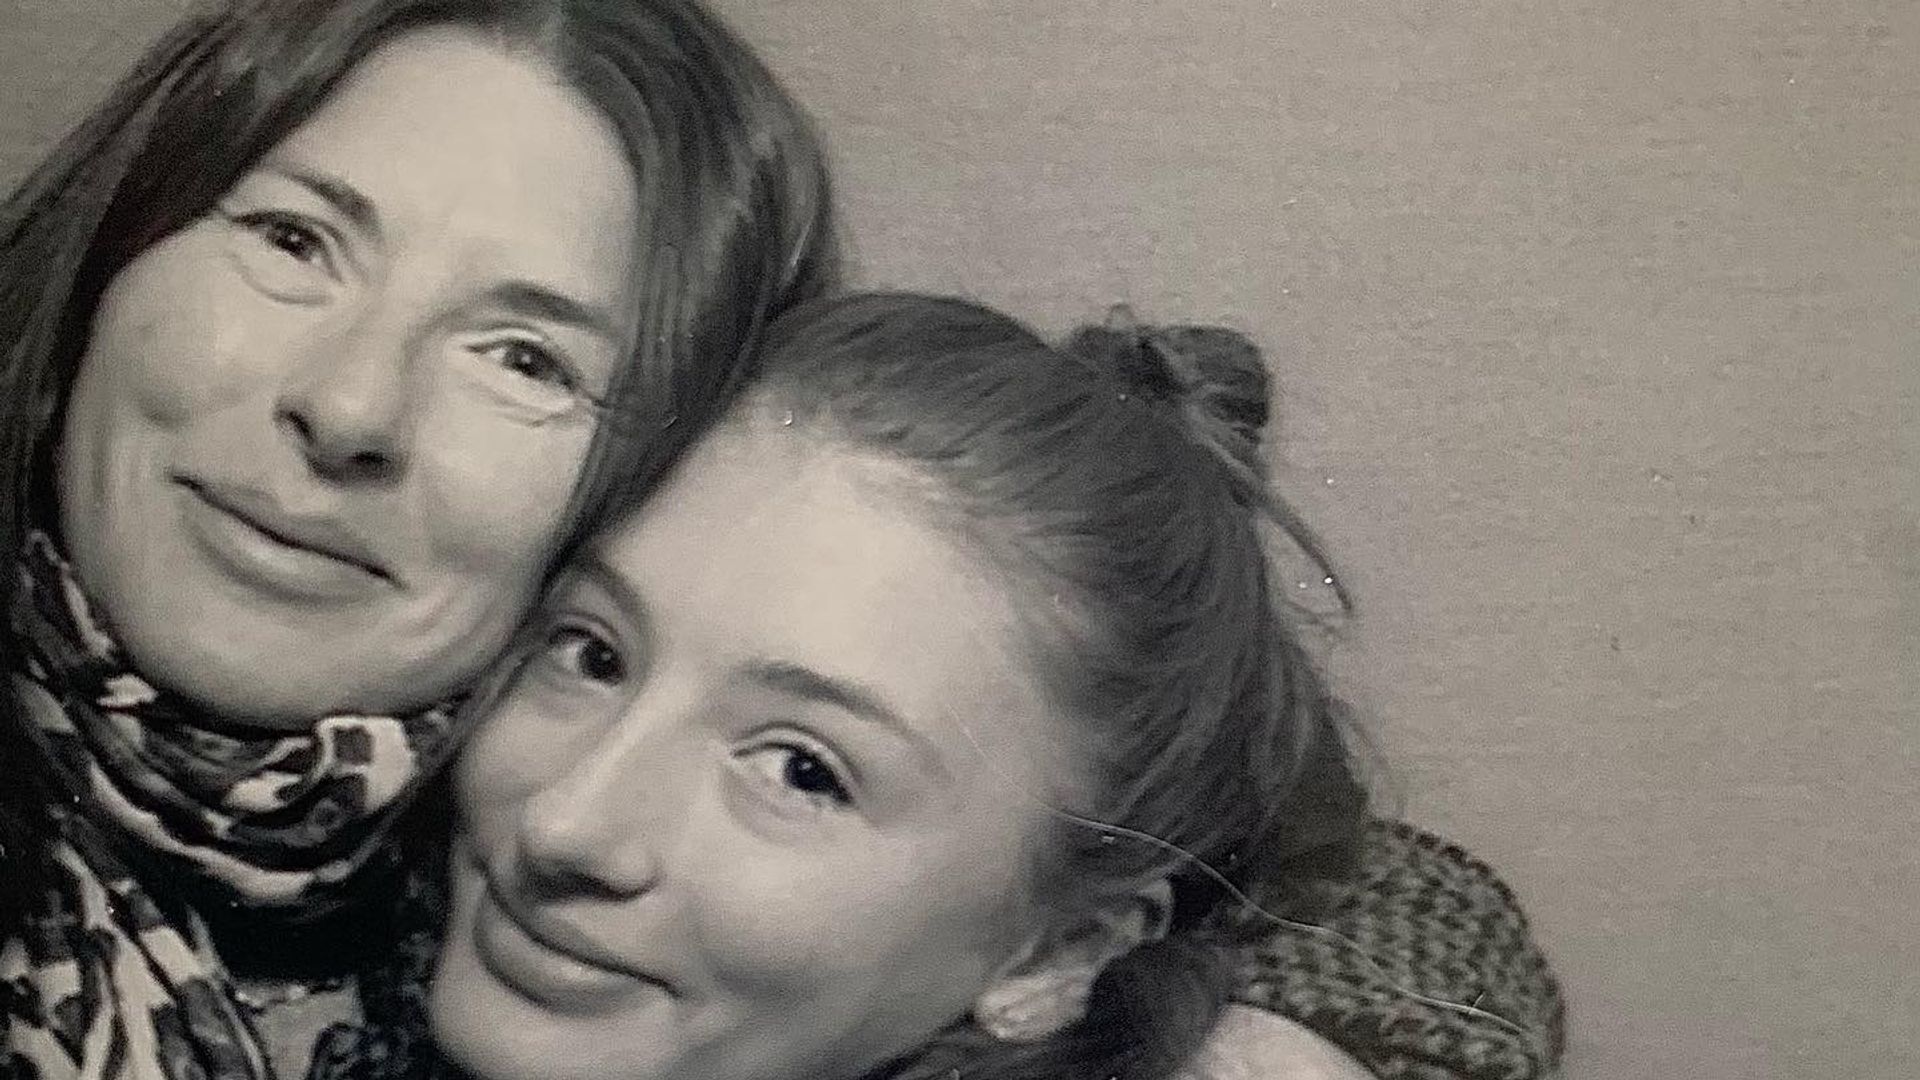 Jools Oliver and daughter Daisy Boo Pamela black and white photo